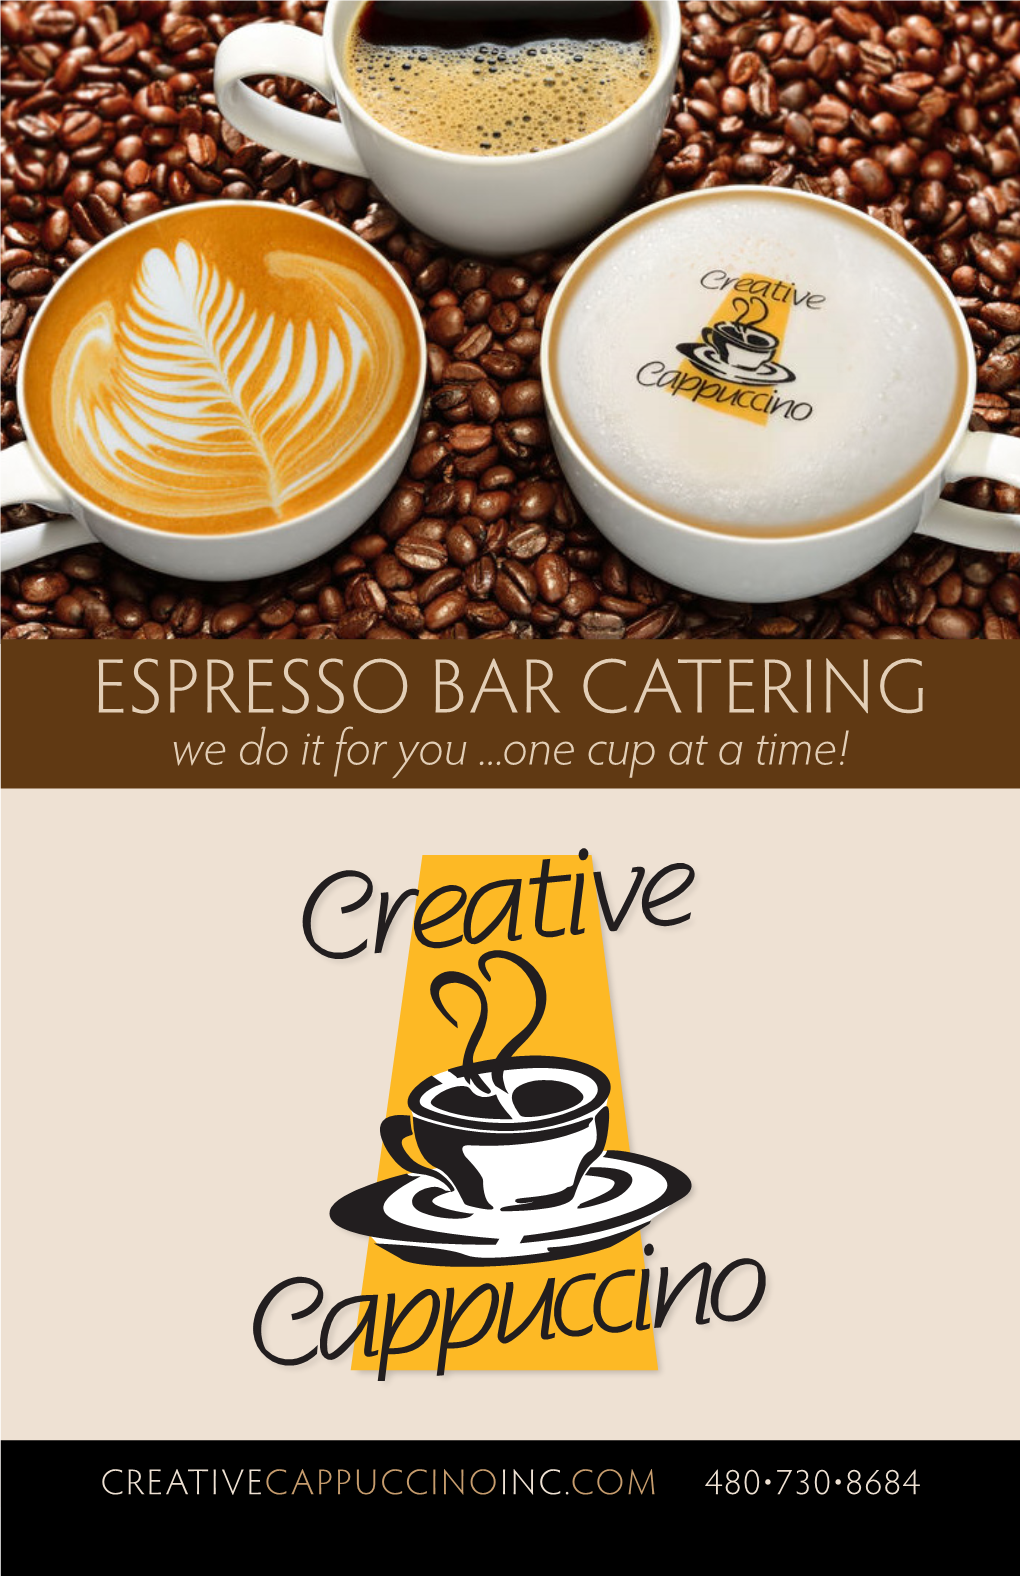 ESPRESSO BAR CATERING We Do It for You ...One Cup at a Time!